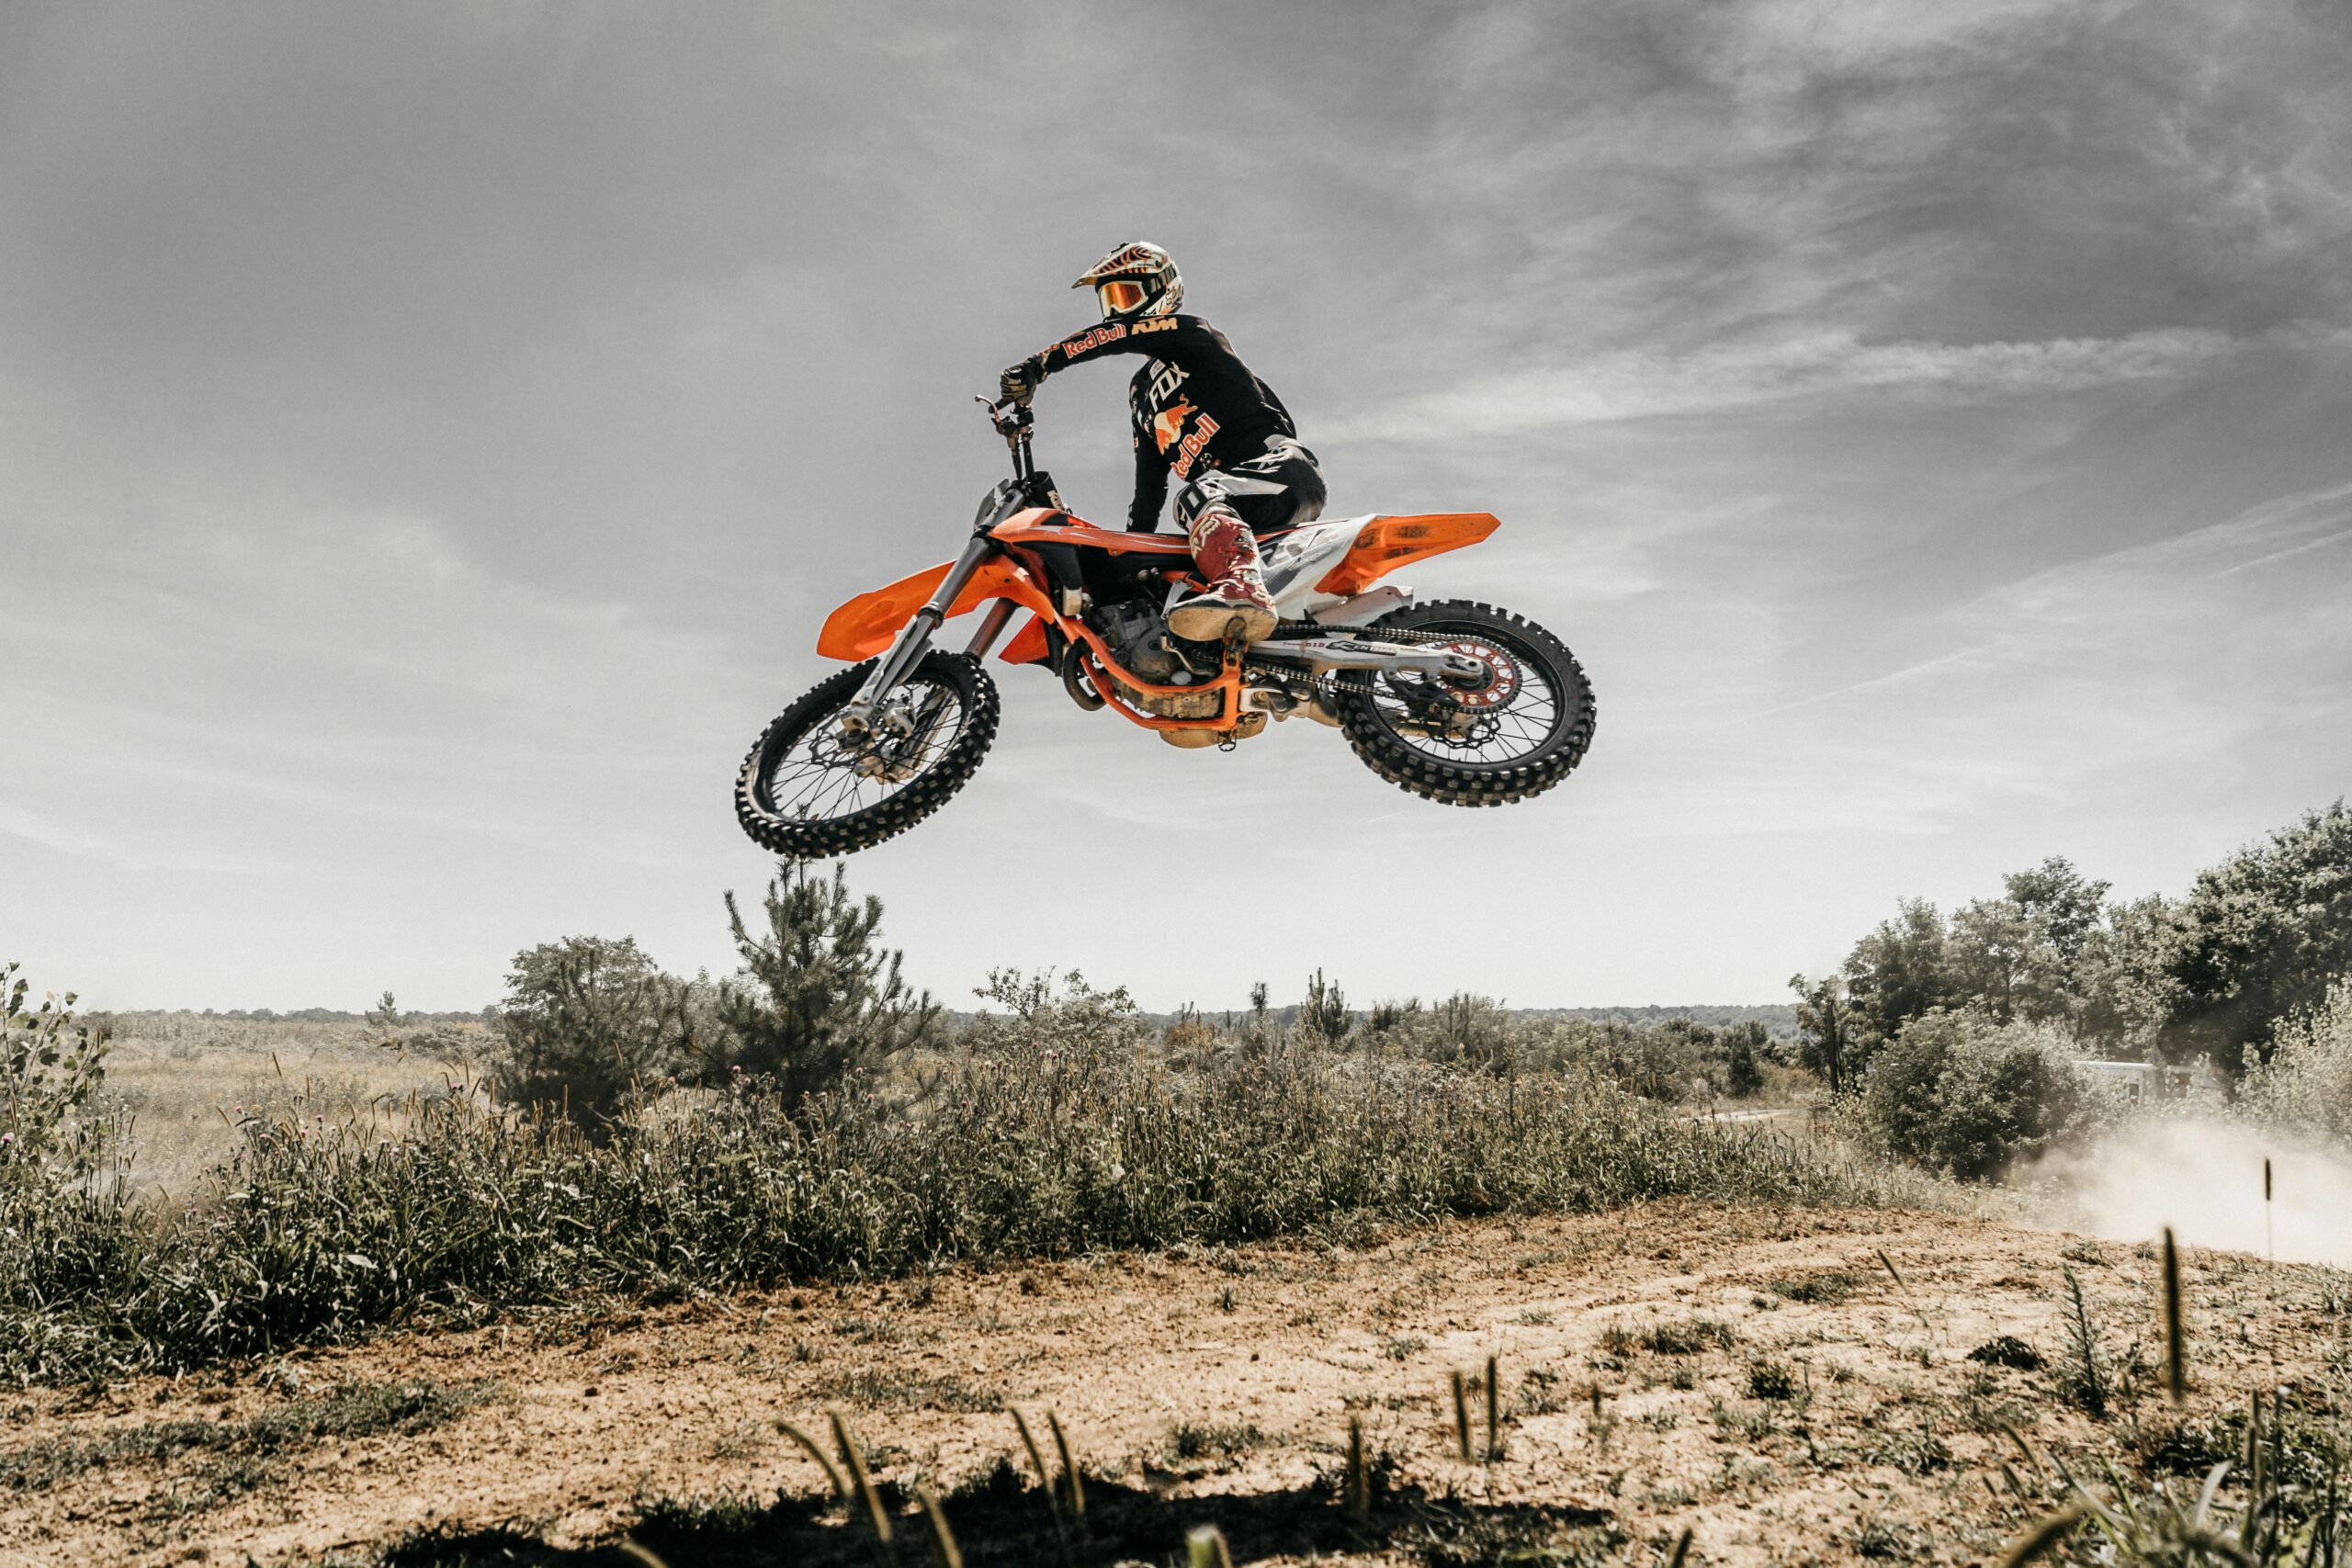 Dirt Bike Jumps: How to Jump Safely and Effectively